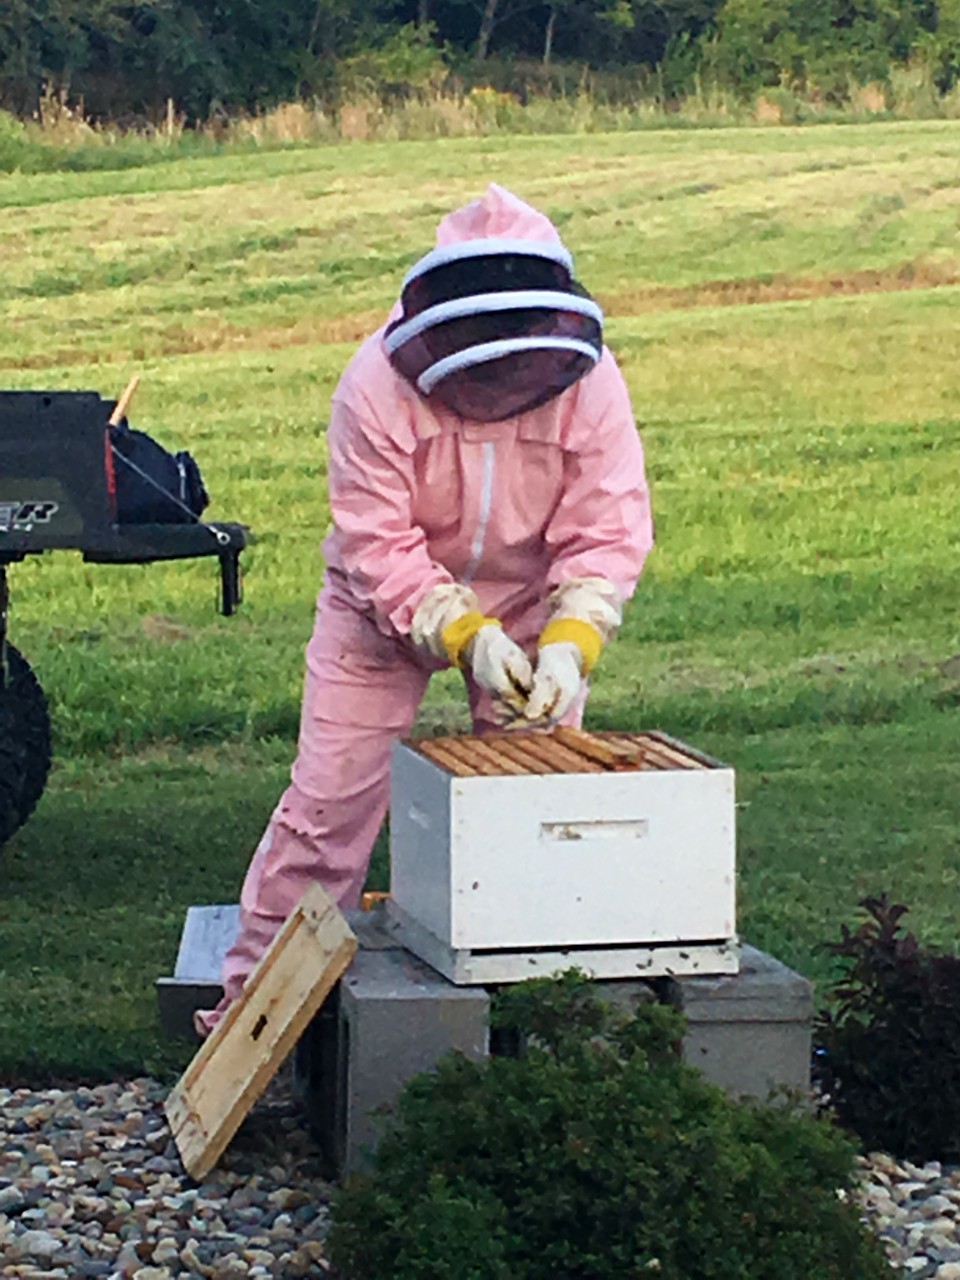 A beekeeper's close call with death changed her life for the better